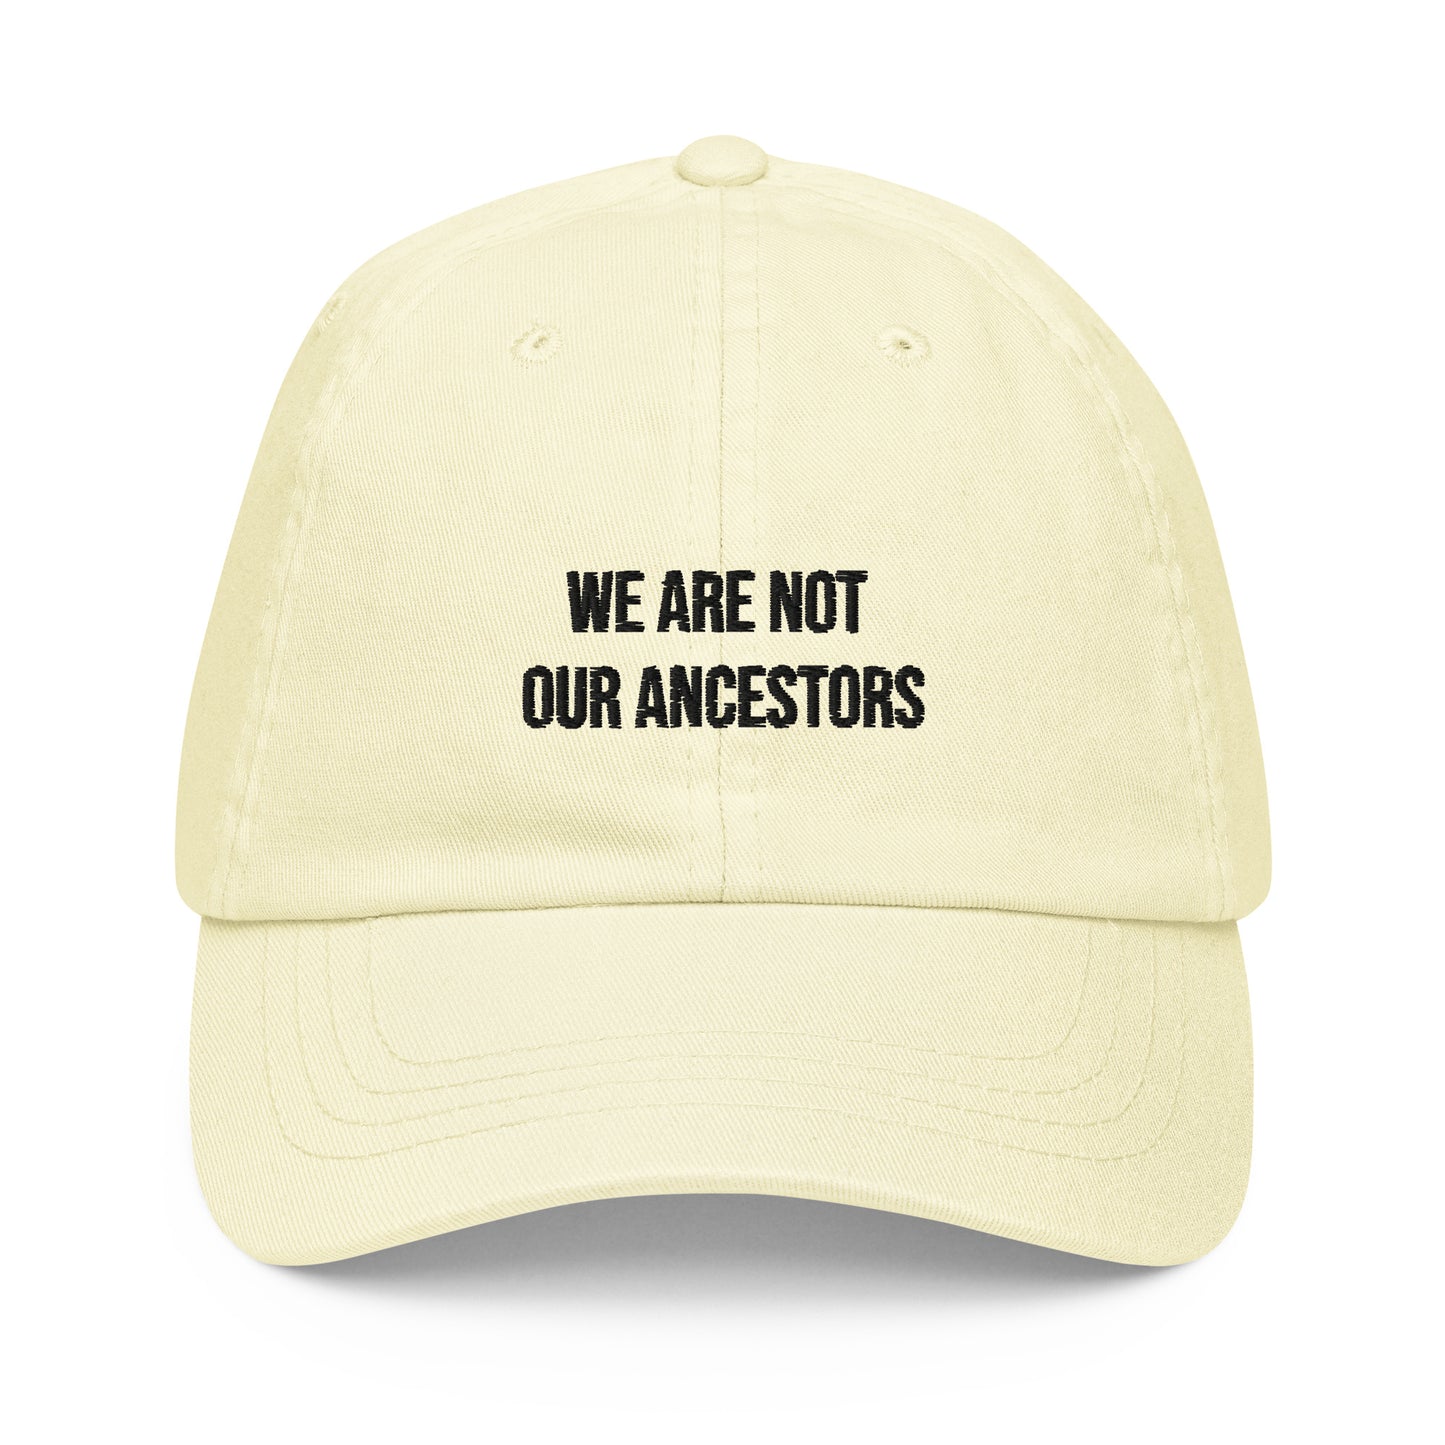 We Are Not Our Ancestors Pastel Baseball Cap